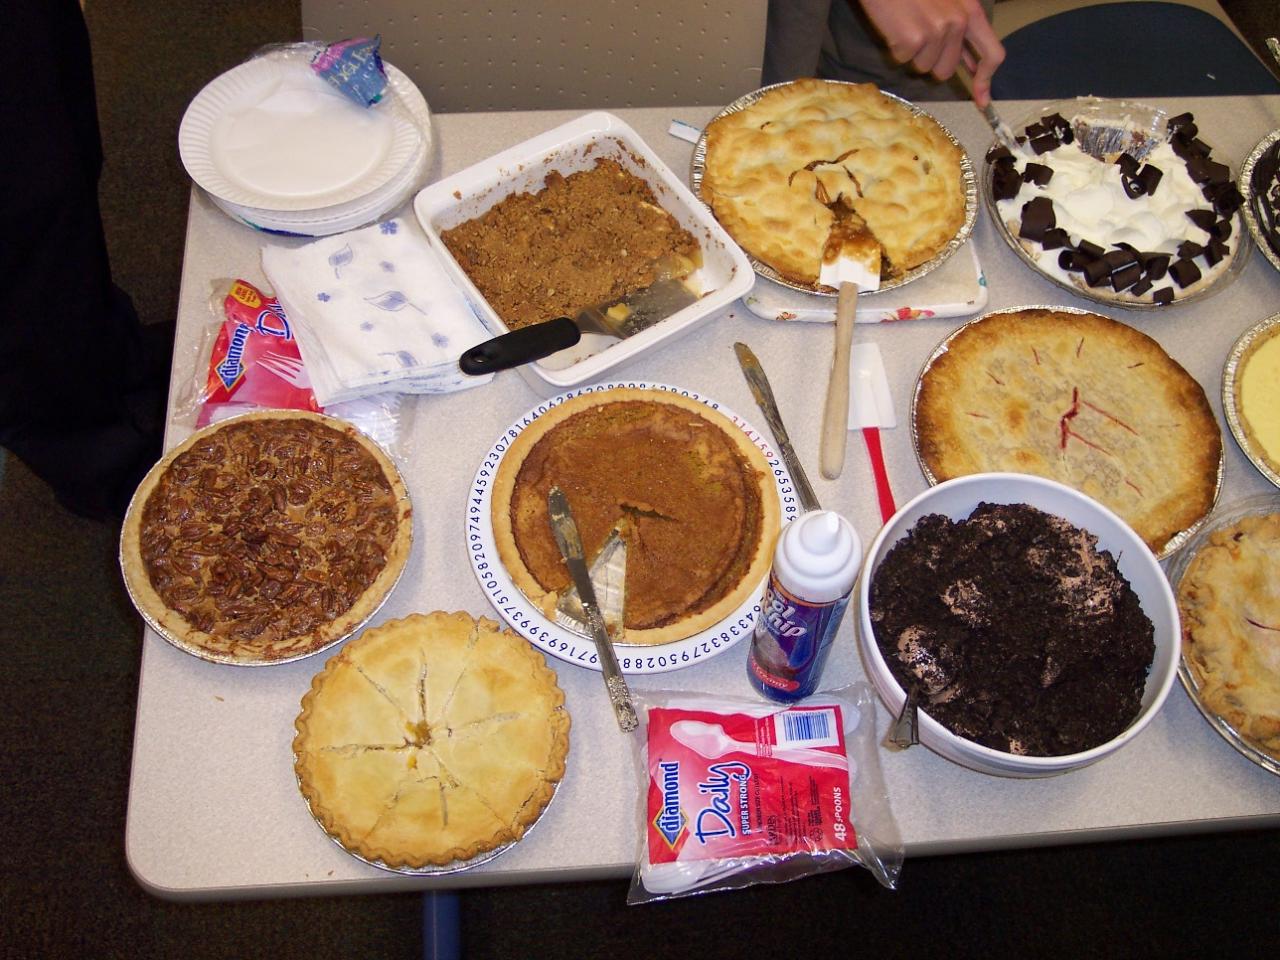 PRISM Math Club: Collection of pies